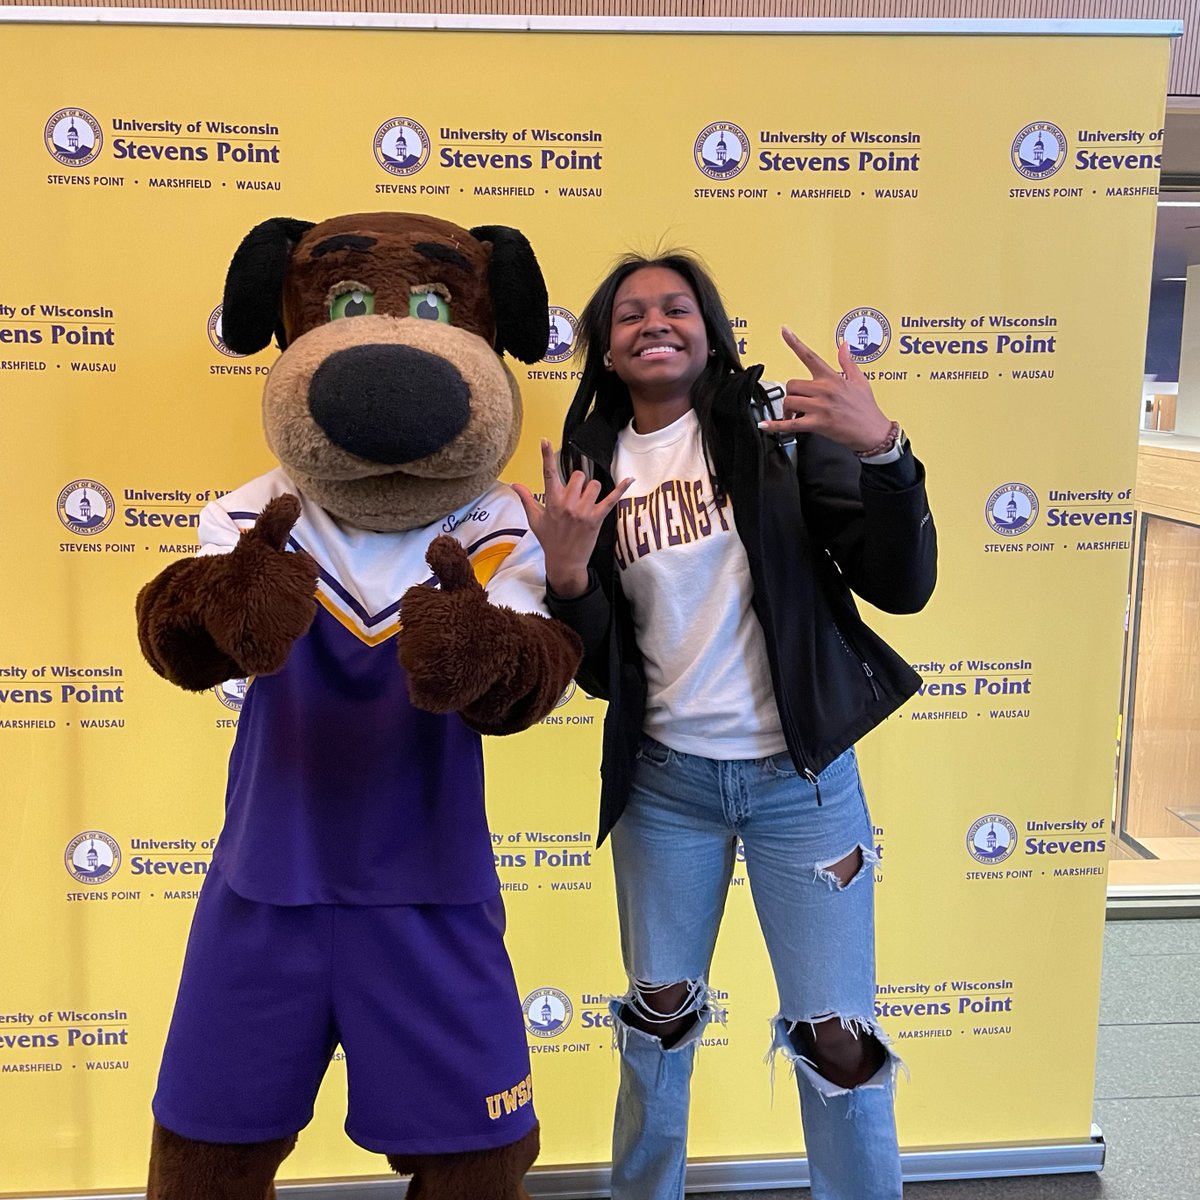 We kicked off our Day of Giving photo challenge this week! For every photo posted with the hashtag #UWSPGivesBack from now until May 7, Chancellor Gibson will donate $1 towards student scholarships! Let's see your #Pointer pride! 💜 💛 #UWSP See more 📸: bit.ly/3VIWk9e